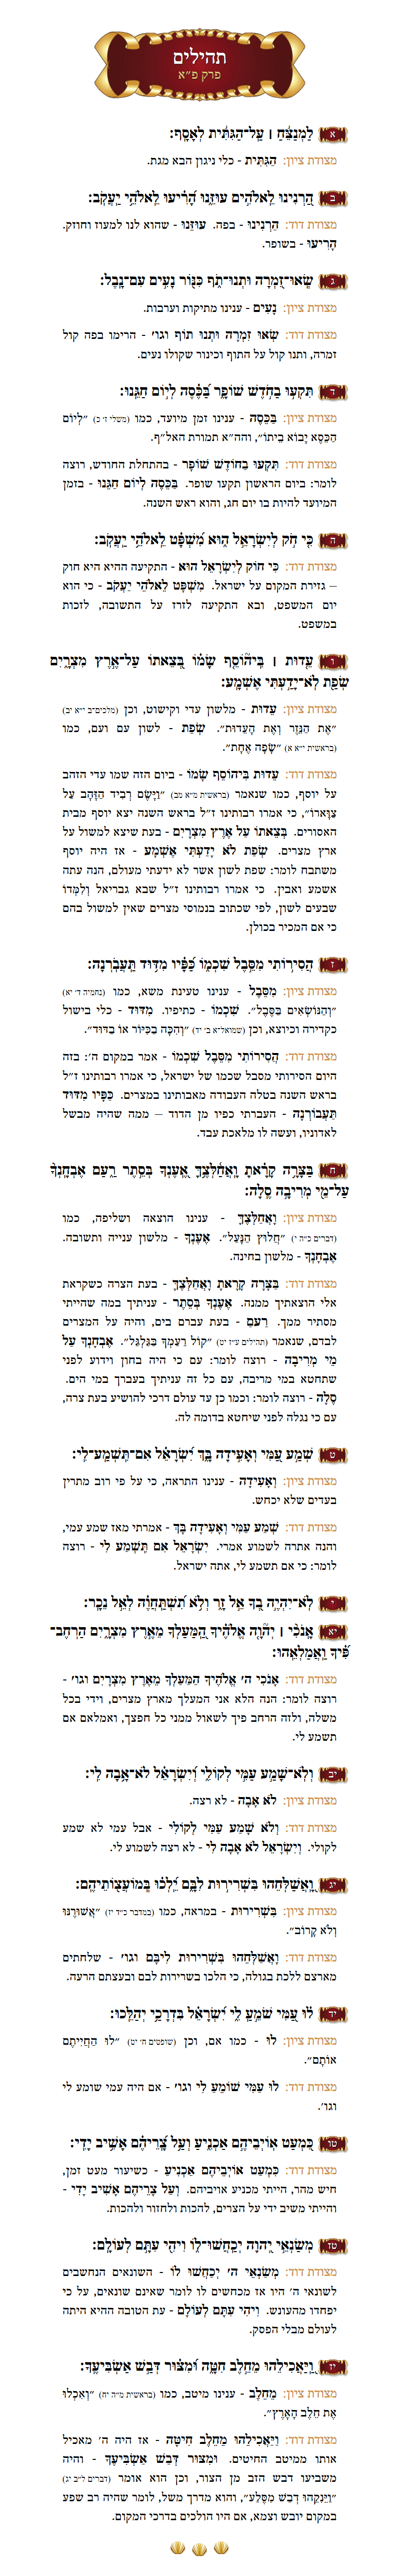 Sefer Tehillim Chapter 81 with commentary